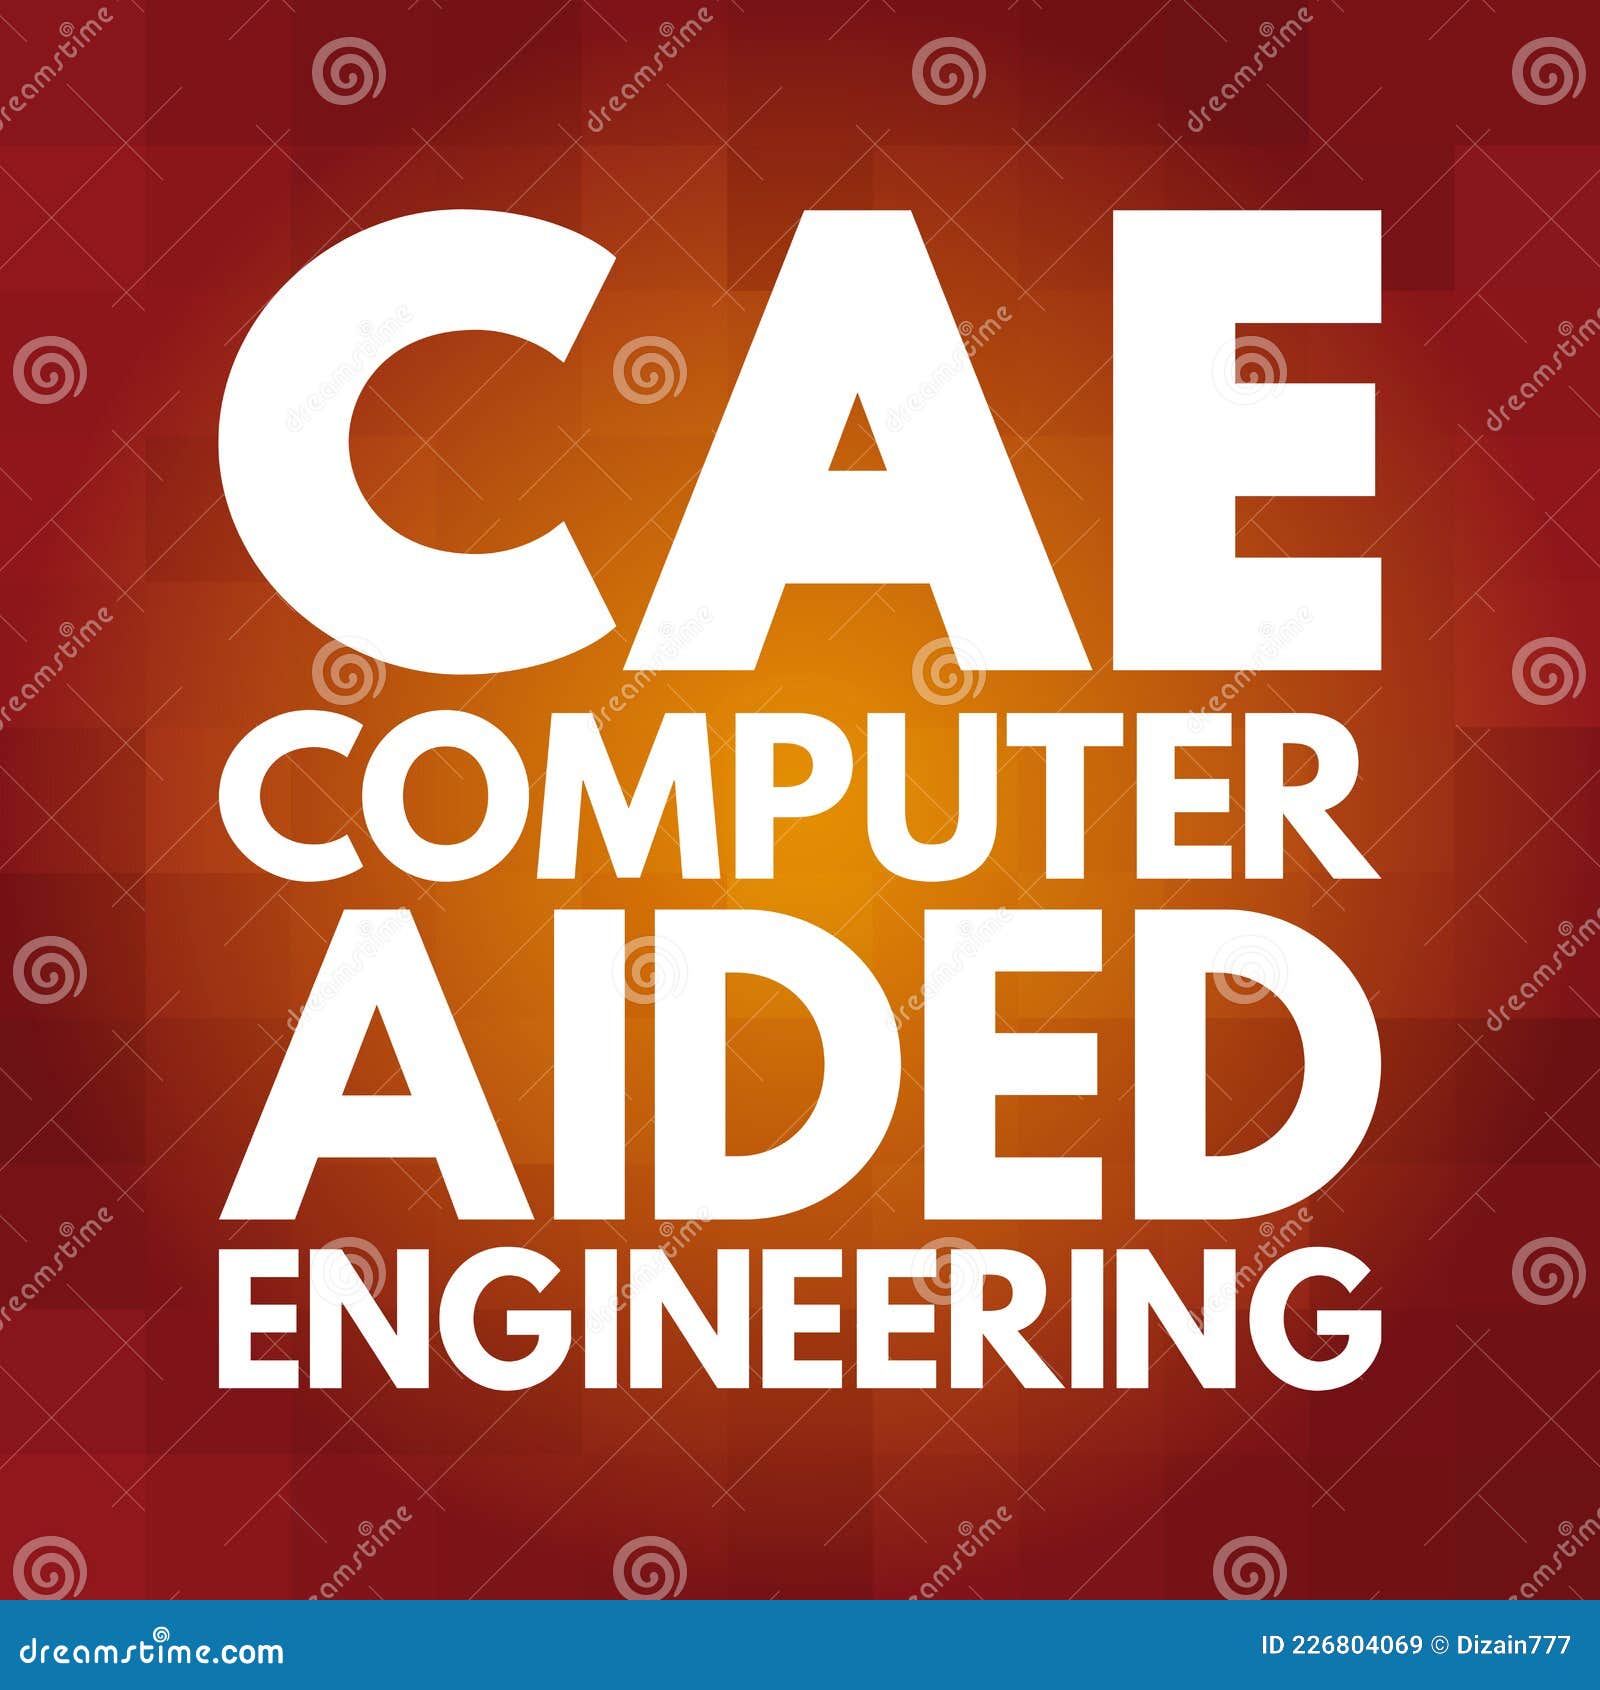 cae - computer aided engineering acronym, technology concept background